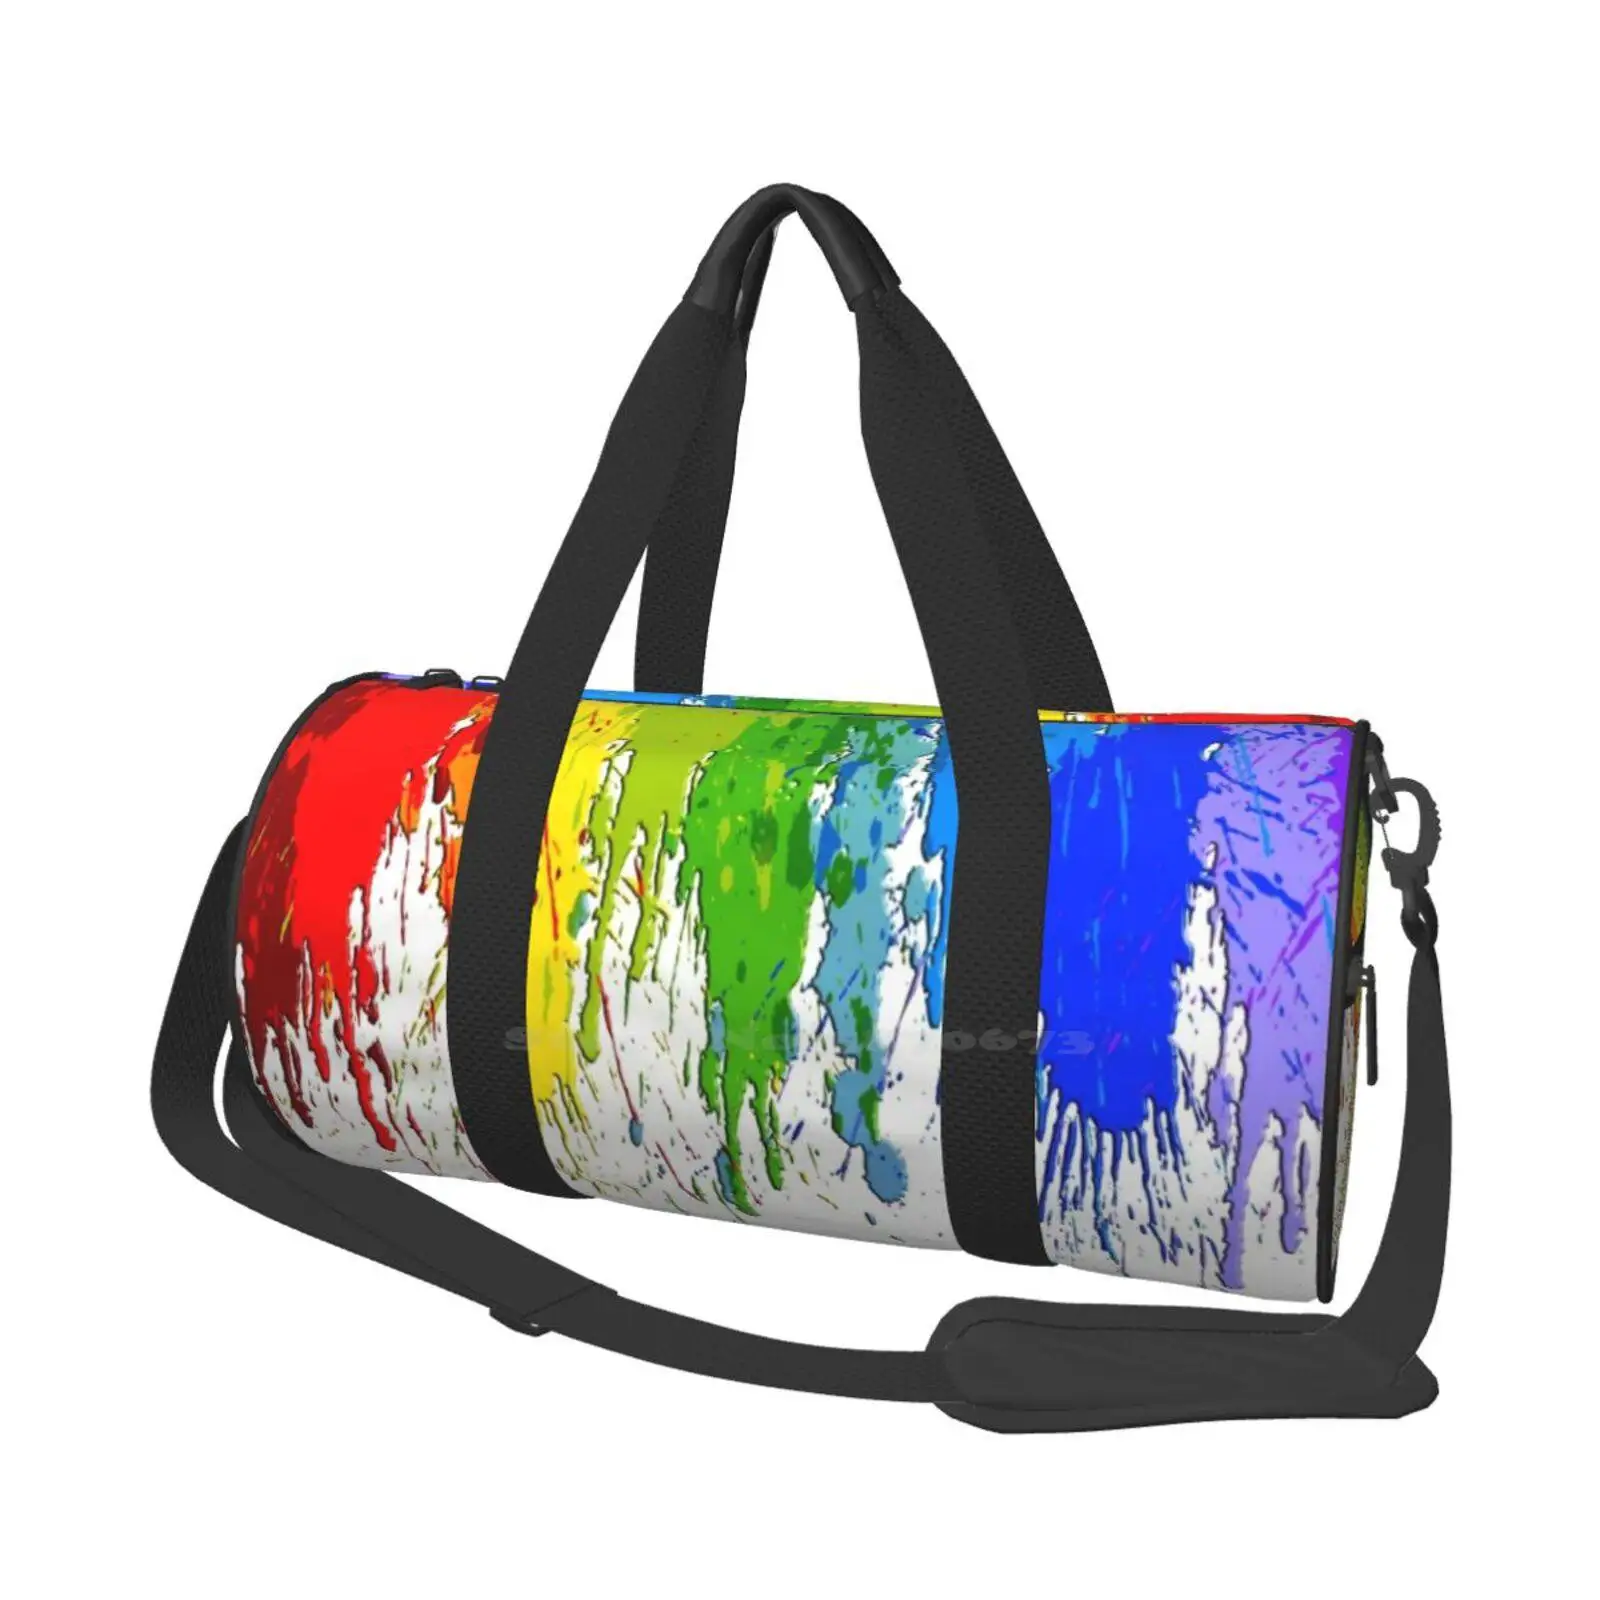 

Colour Spilage Color Spilage Shoulder Bag Shopping Storage Bags Satchel Men Women Boom Dripping Paint Dripping Drip Watercolor